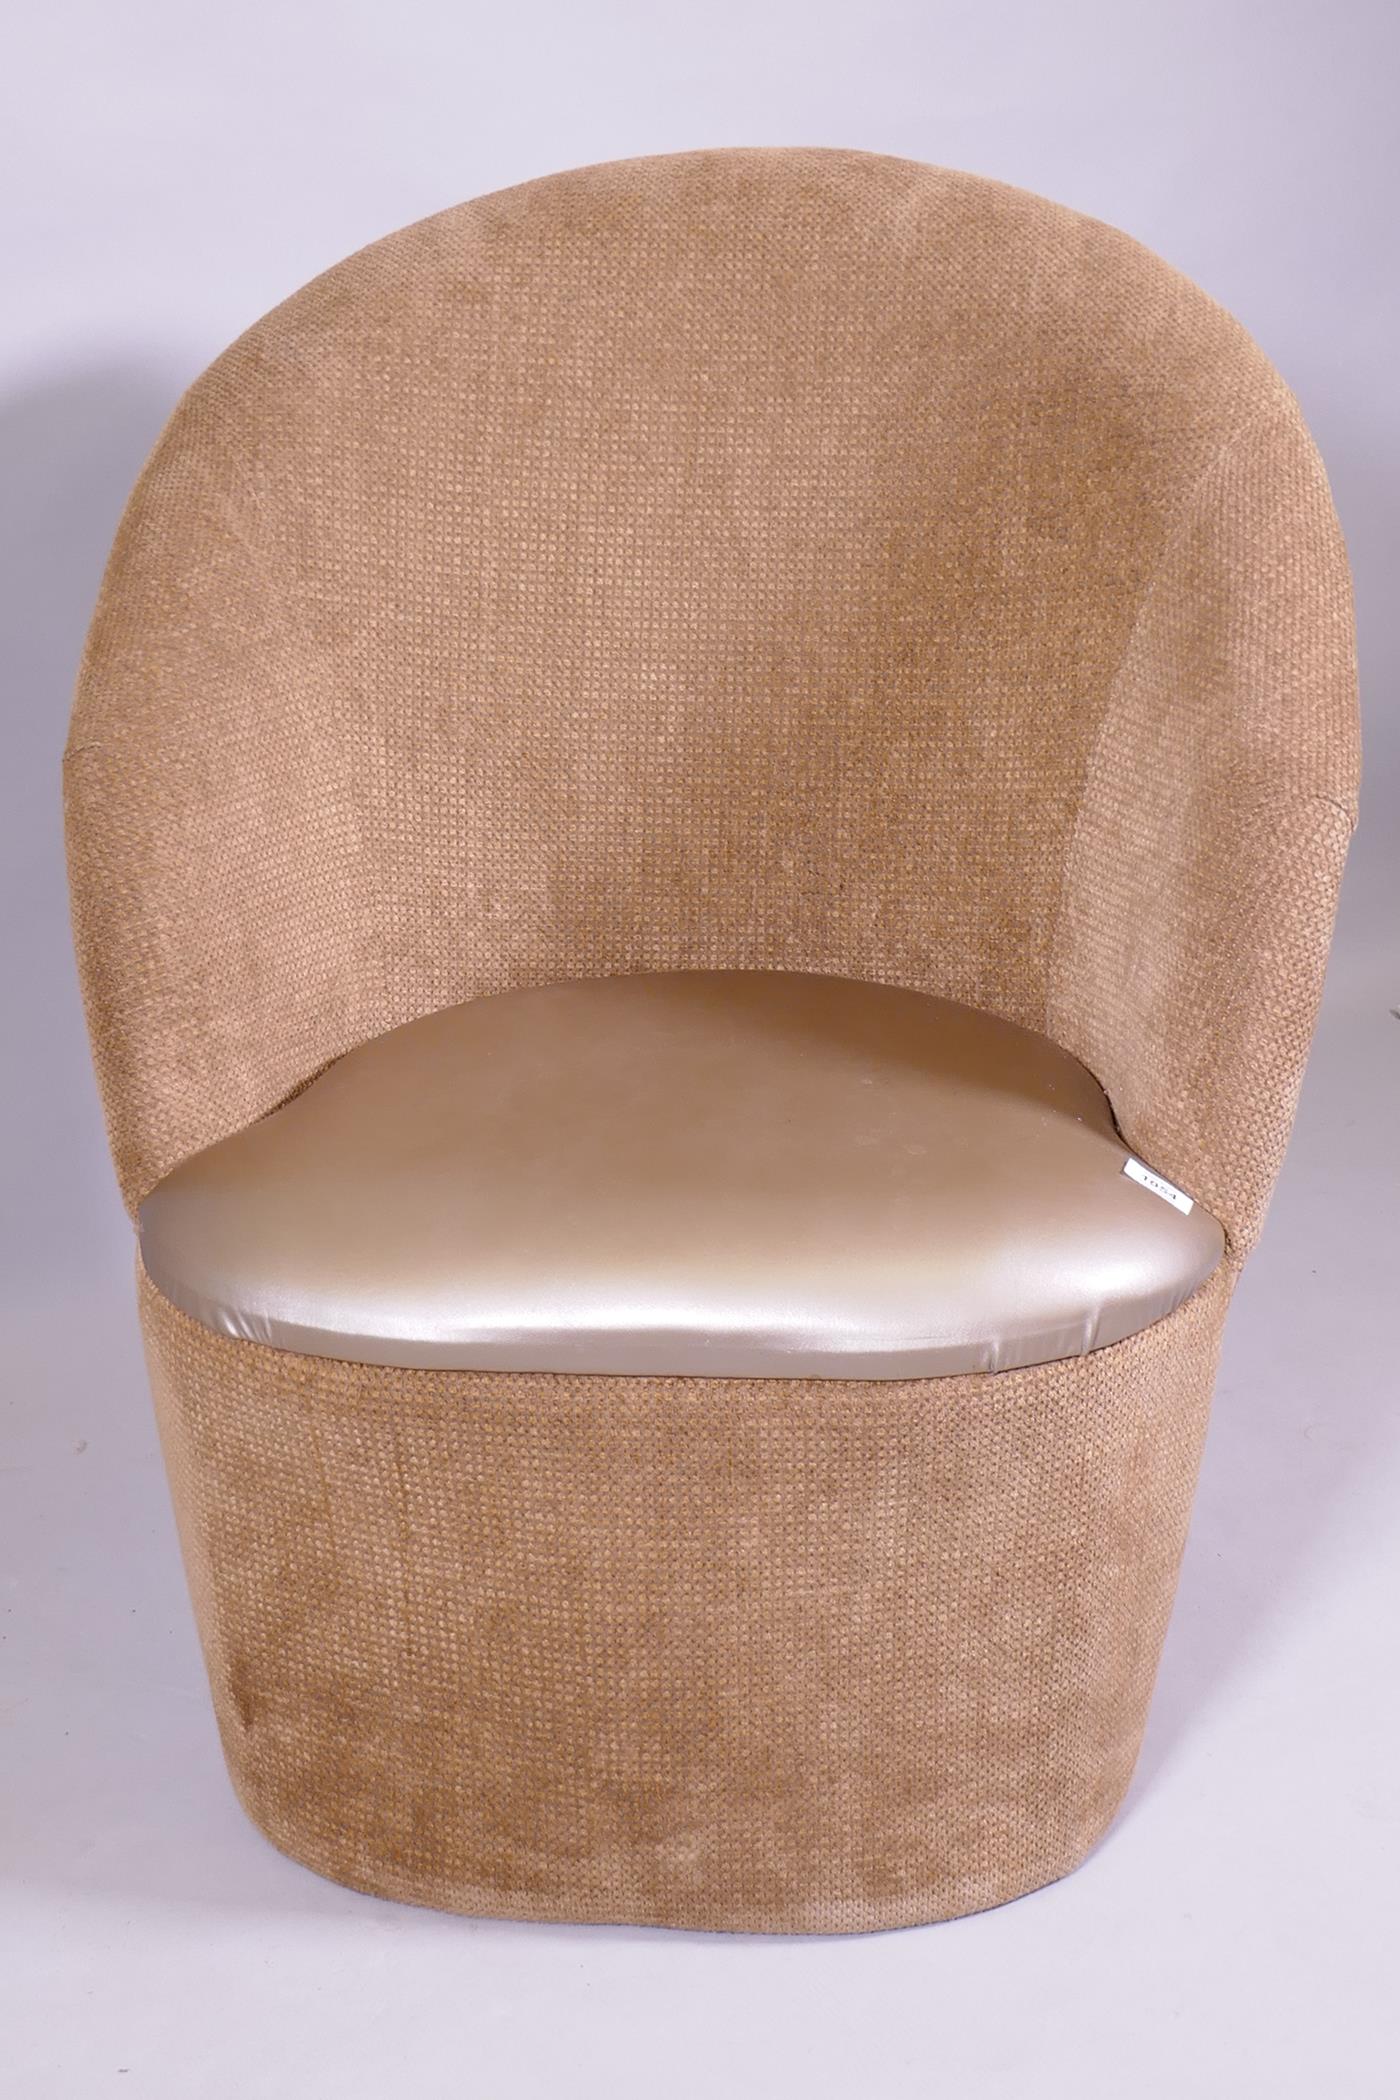 A 1980s tub chair with leatherette seat, by repute ex Stringfellow's Angel Club - Image 2 of 2